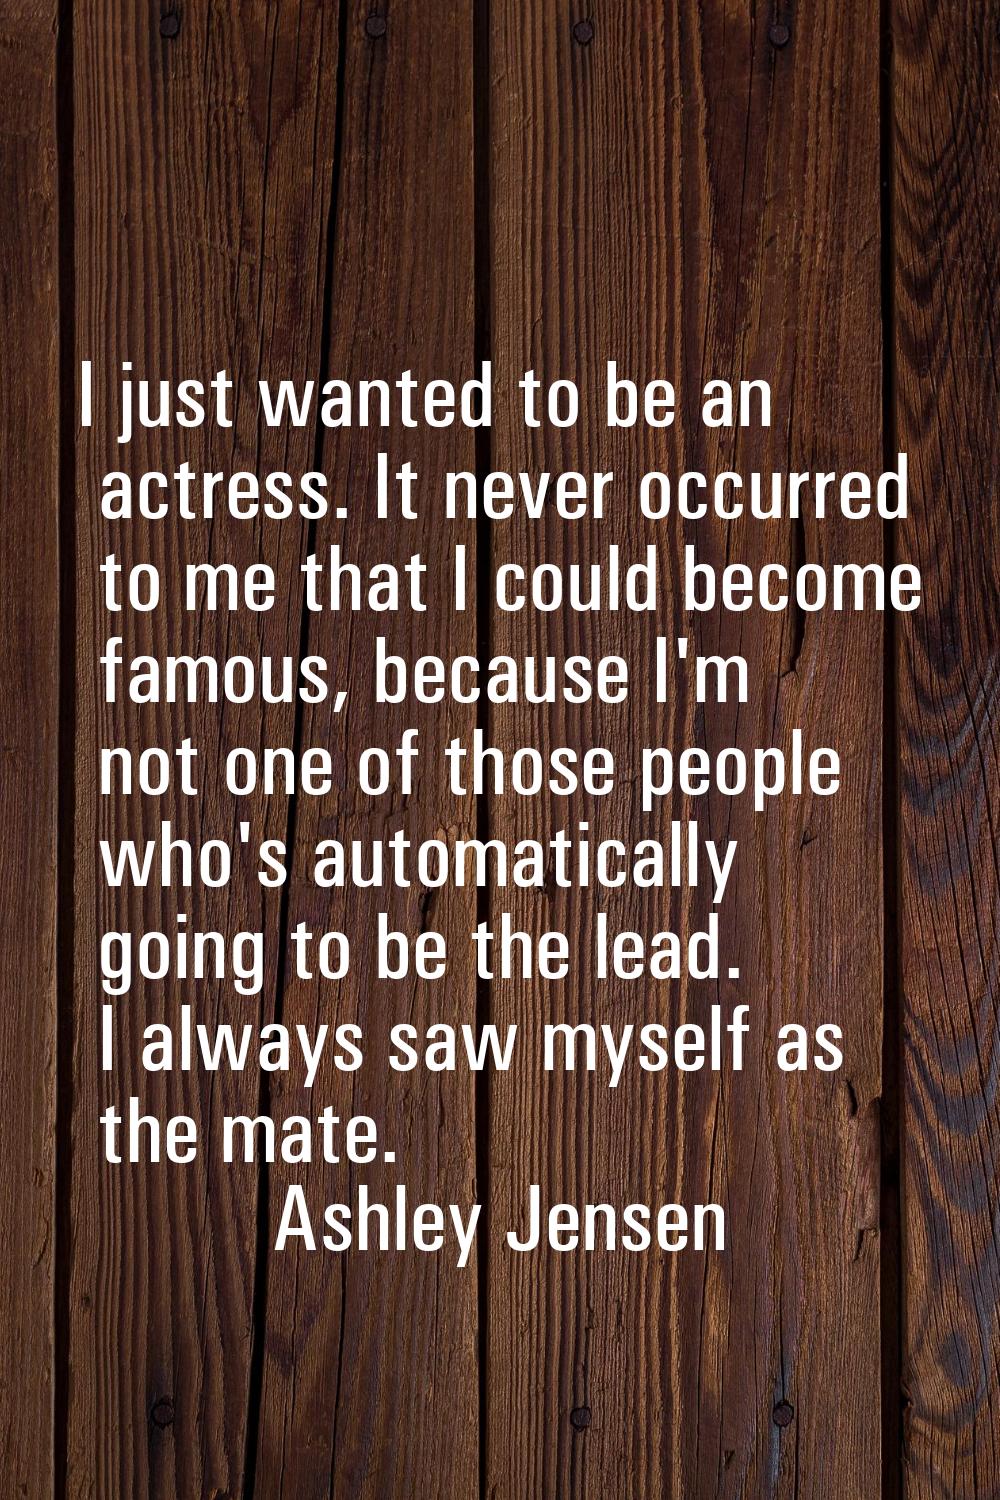 I just wanted to be an actress. It never occurred to me that I could become famous, because I'm not